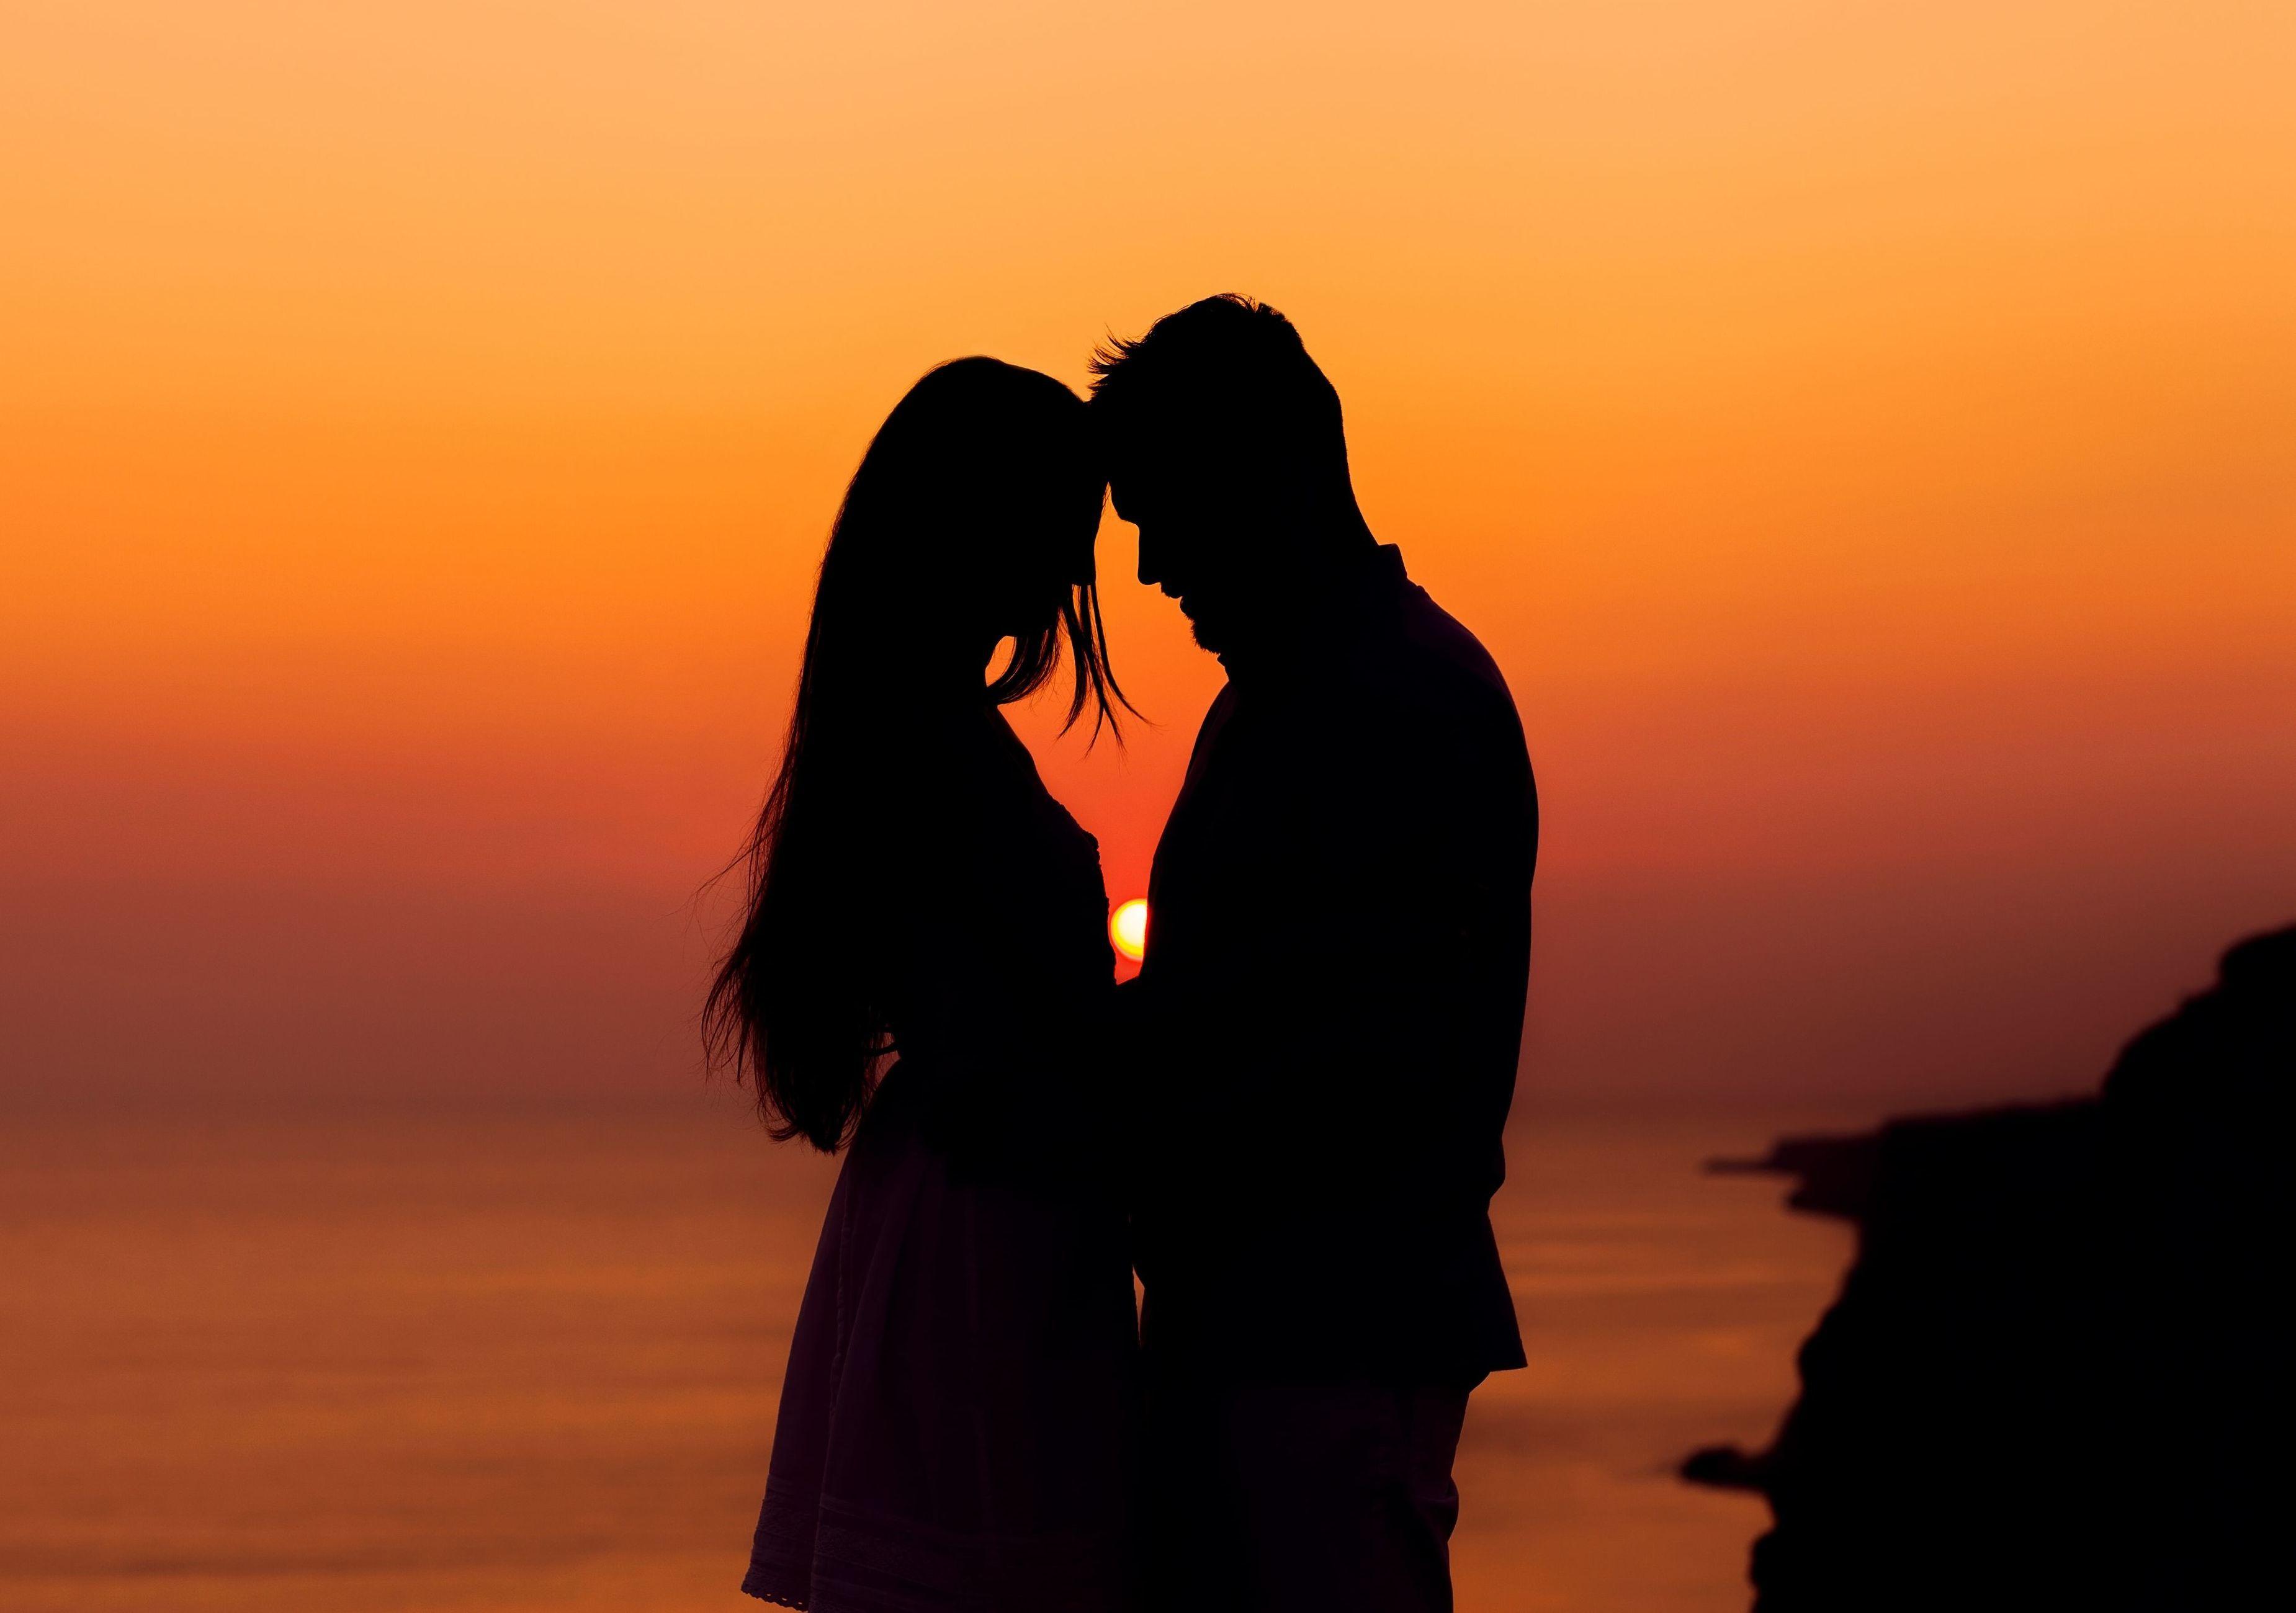 Sunset Couple Silhouette Wallpapers Wallpaper Cave 9924